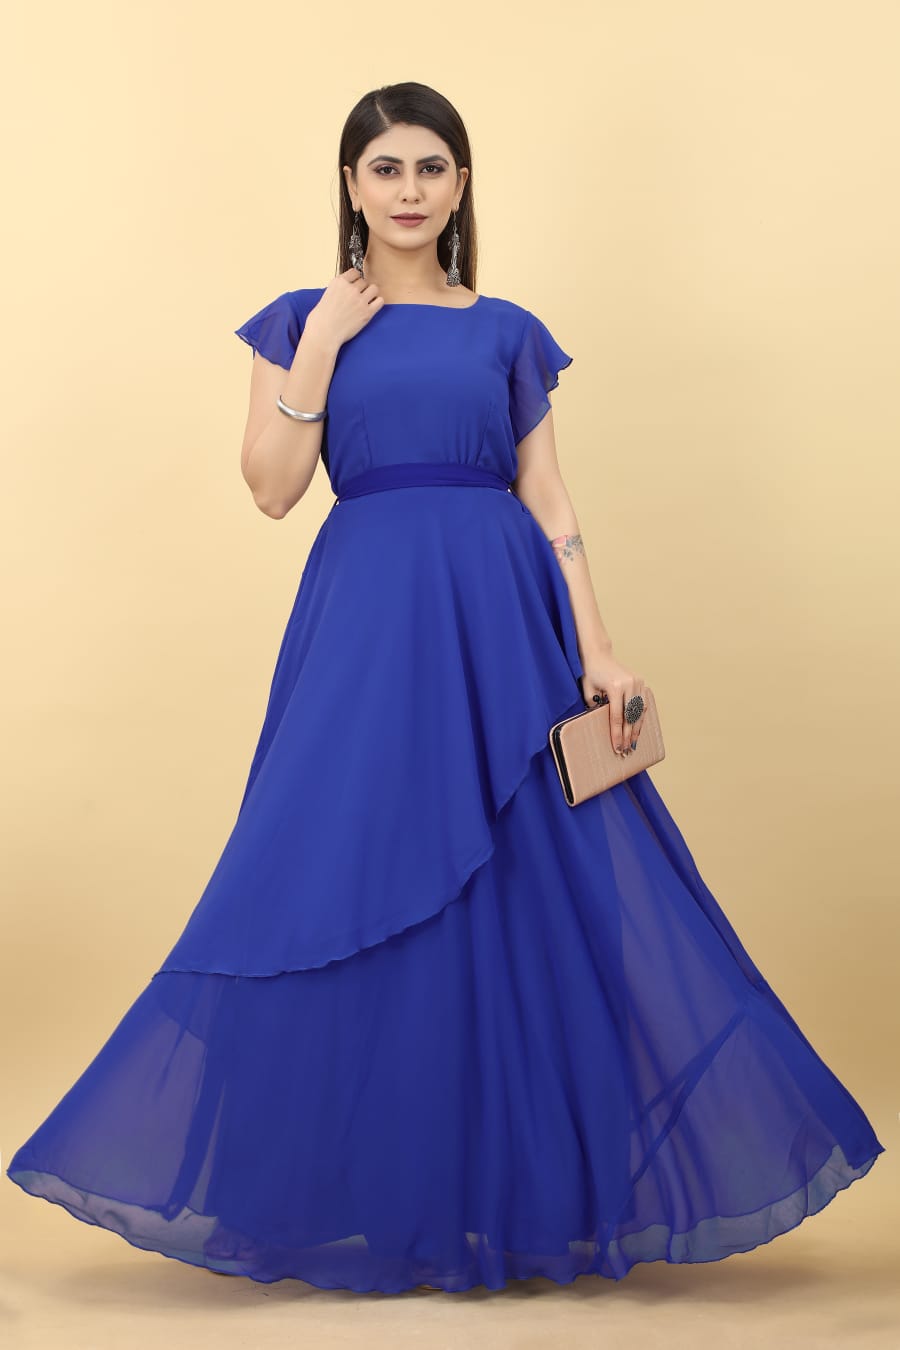 Designer party wear gown style